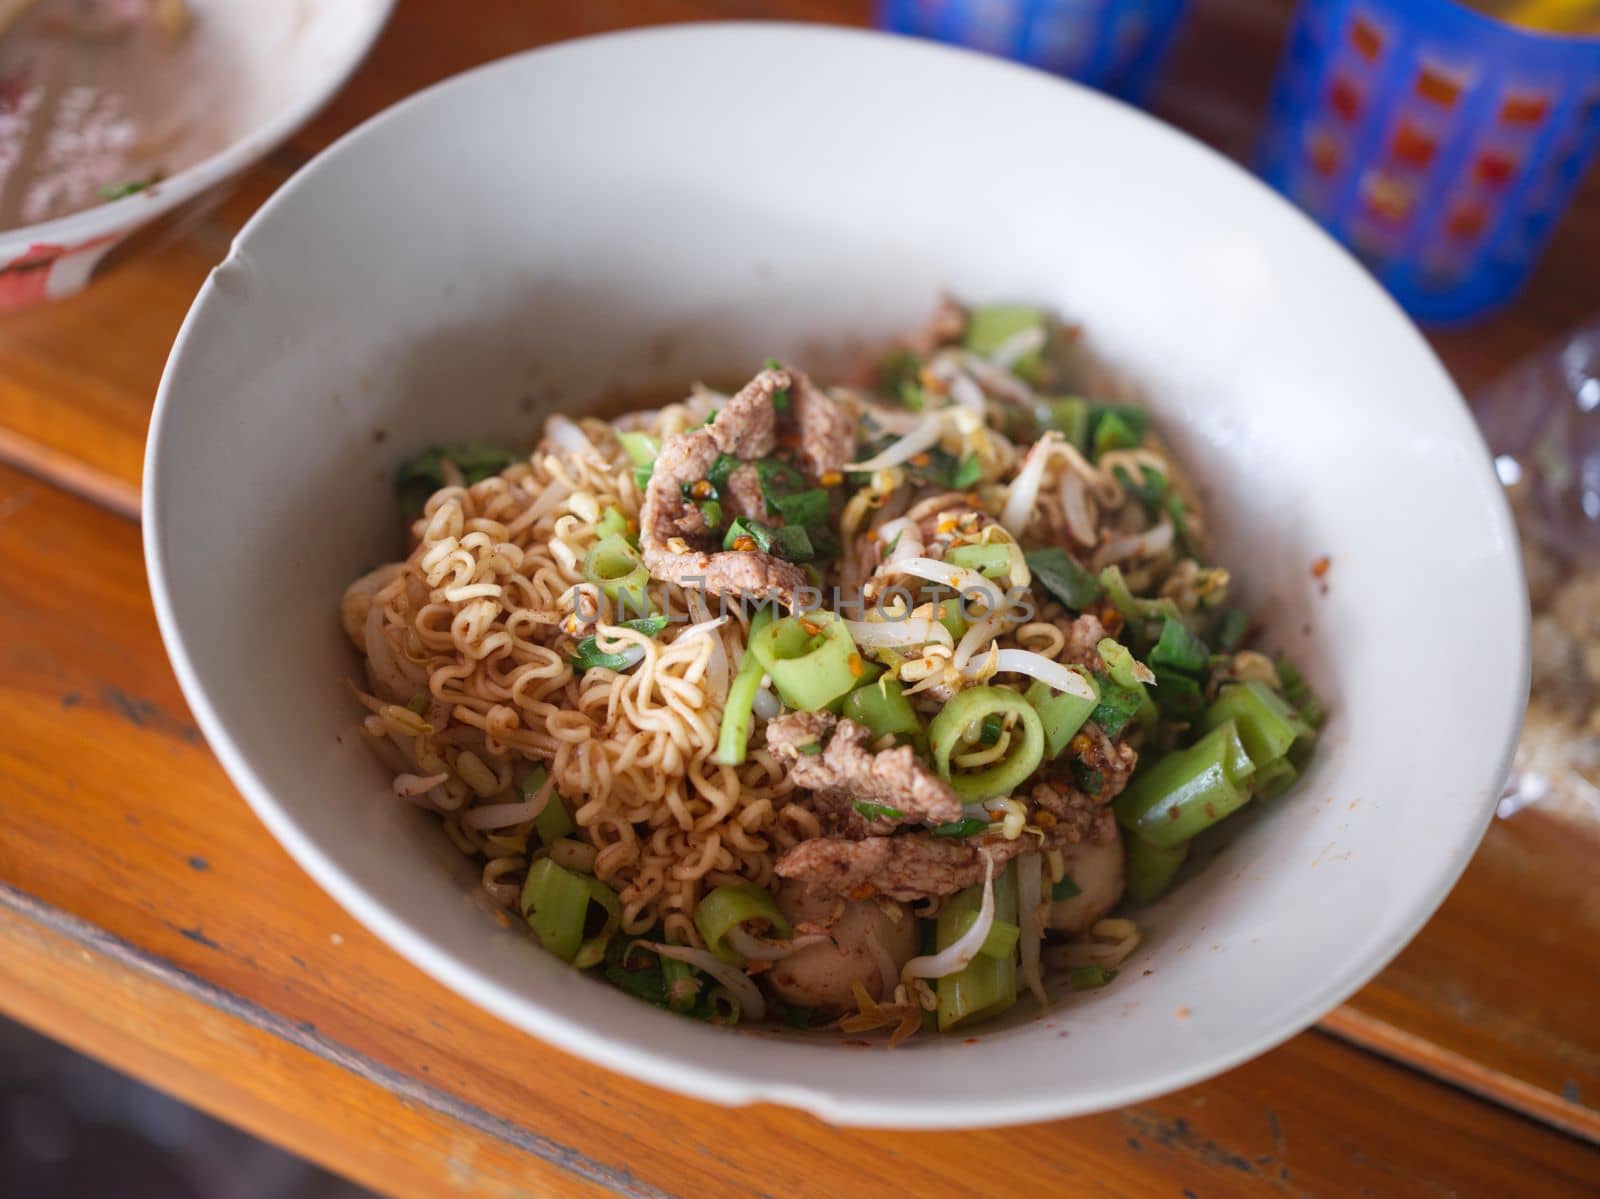 Thai Noodle beef is very delicious on wood table by Hepjam